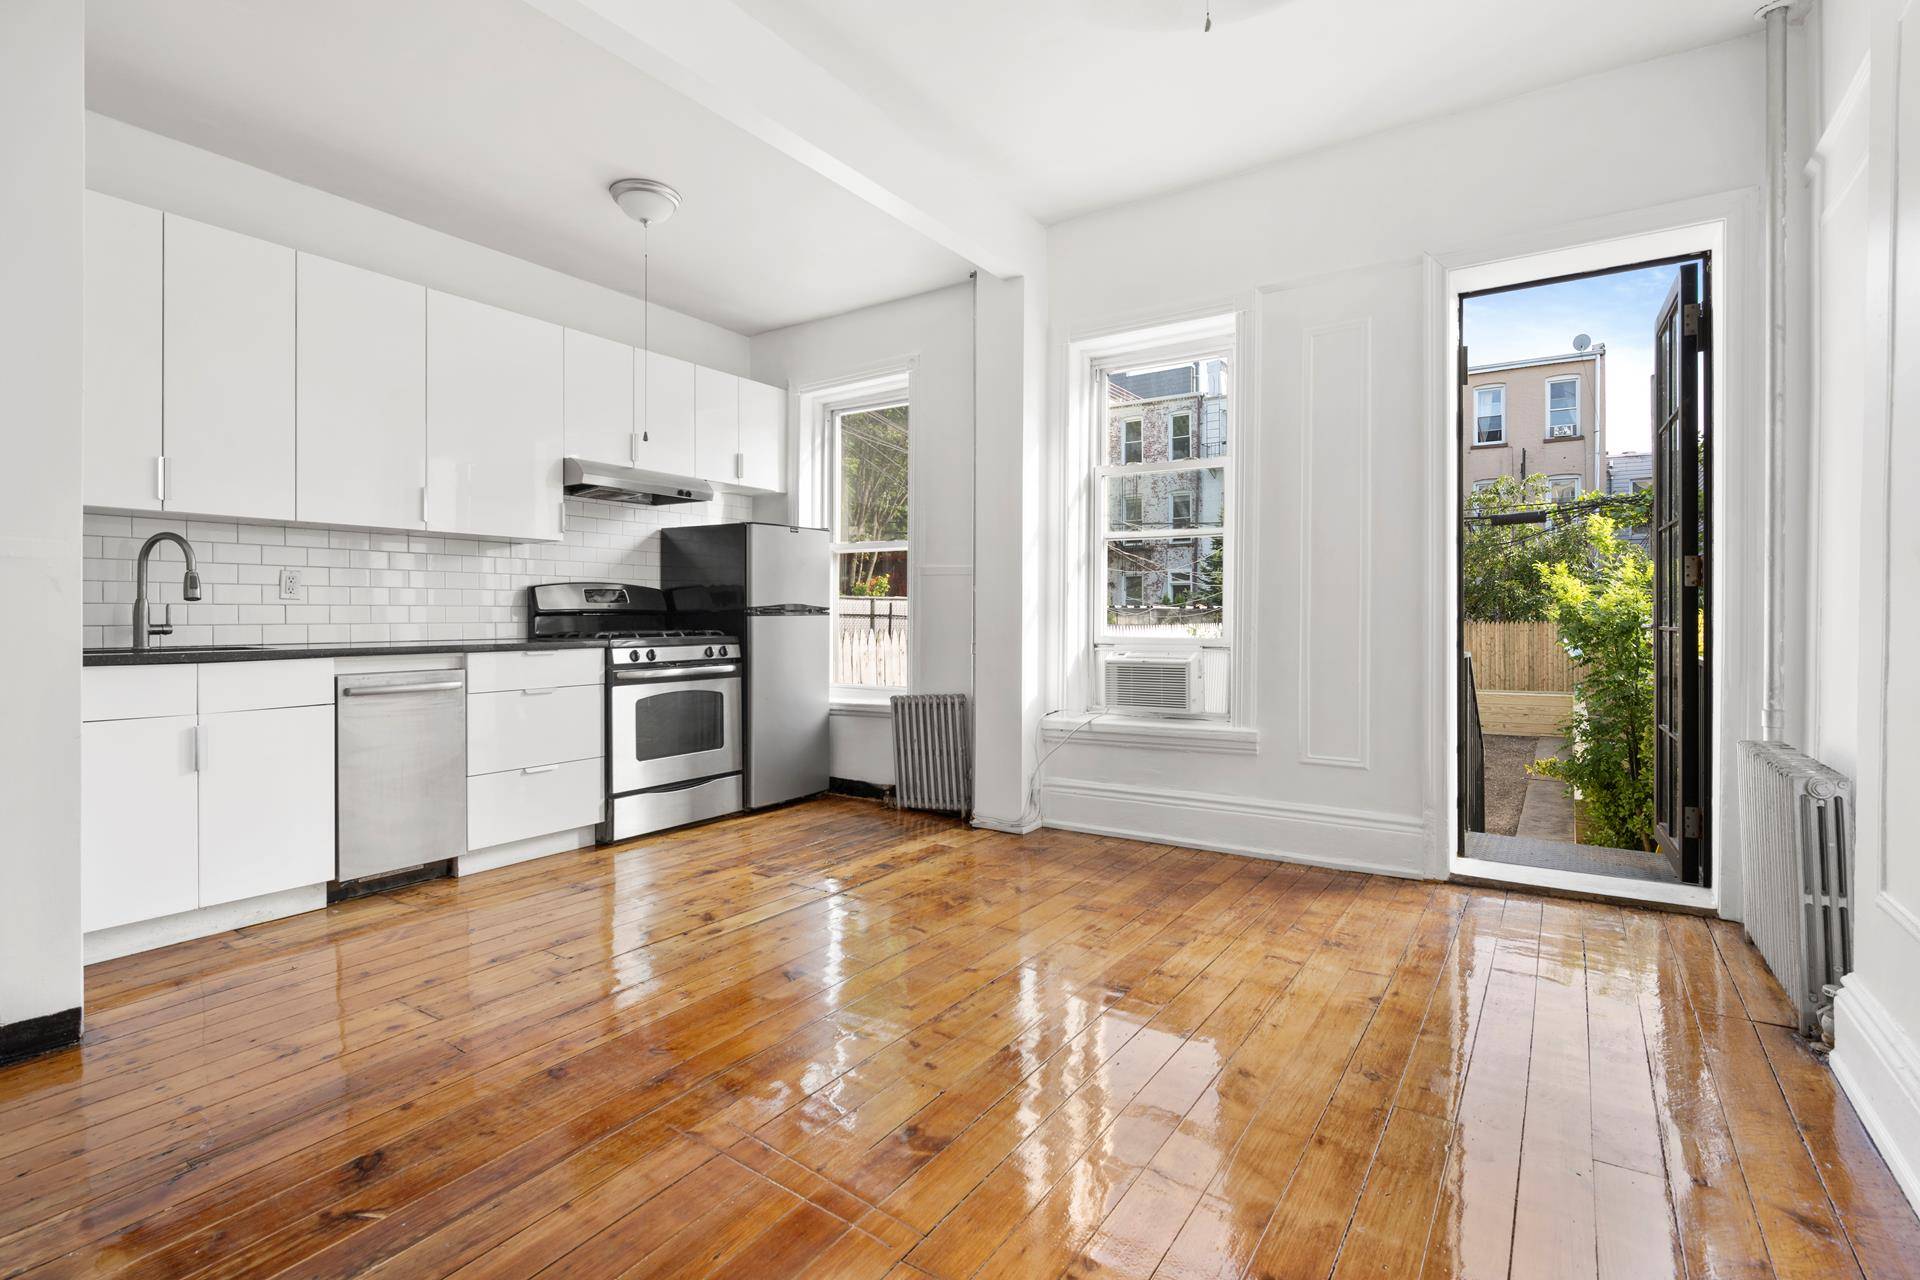 Douglas Elliman is pleased to offer 192 13th St, Brooklyn, NY 11215 Located in Gowanus section of Brooklyn New York.